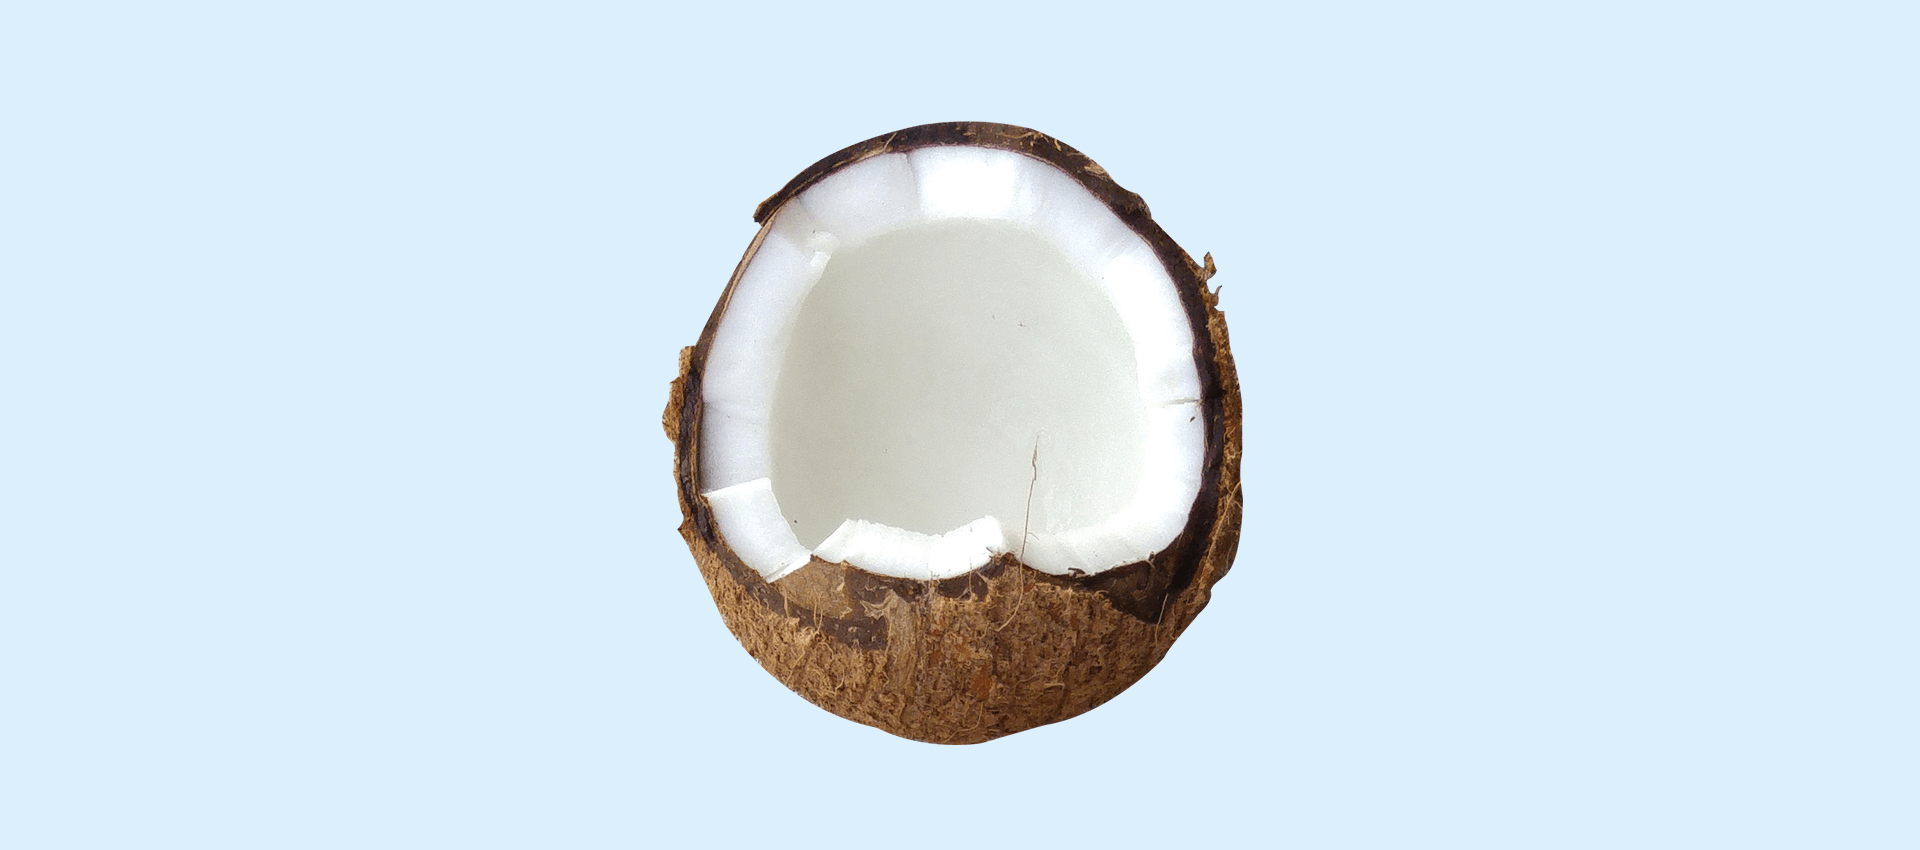 My favorite ways to use coconut oil